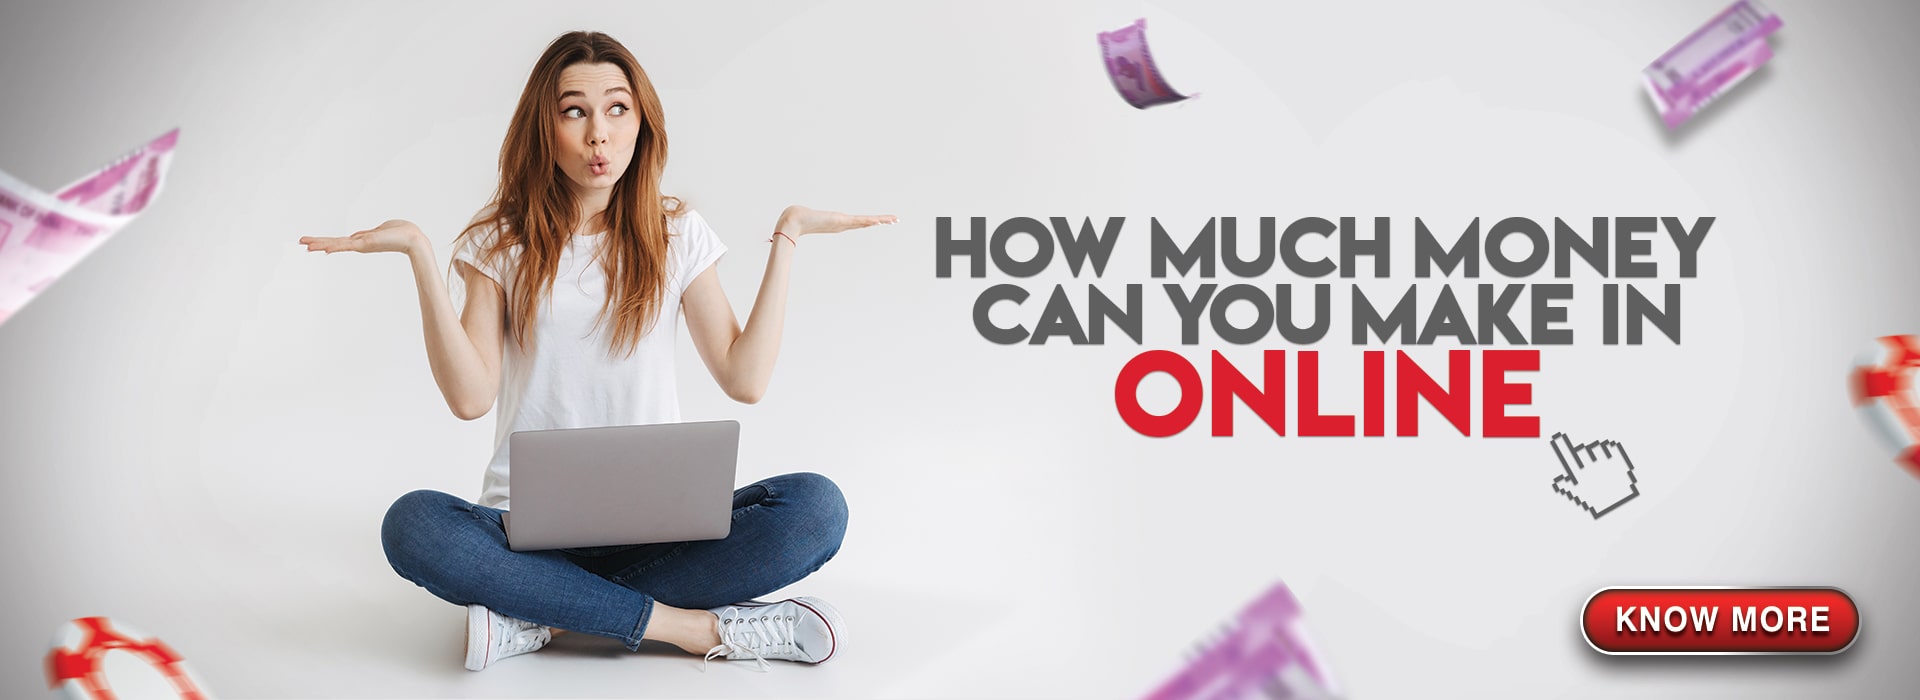 How Much Money Can You Make in Online Poker